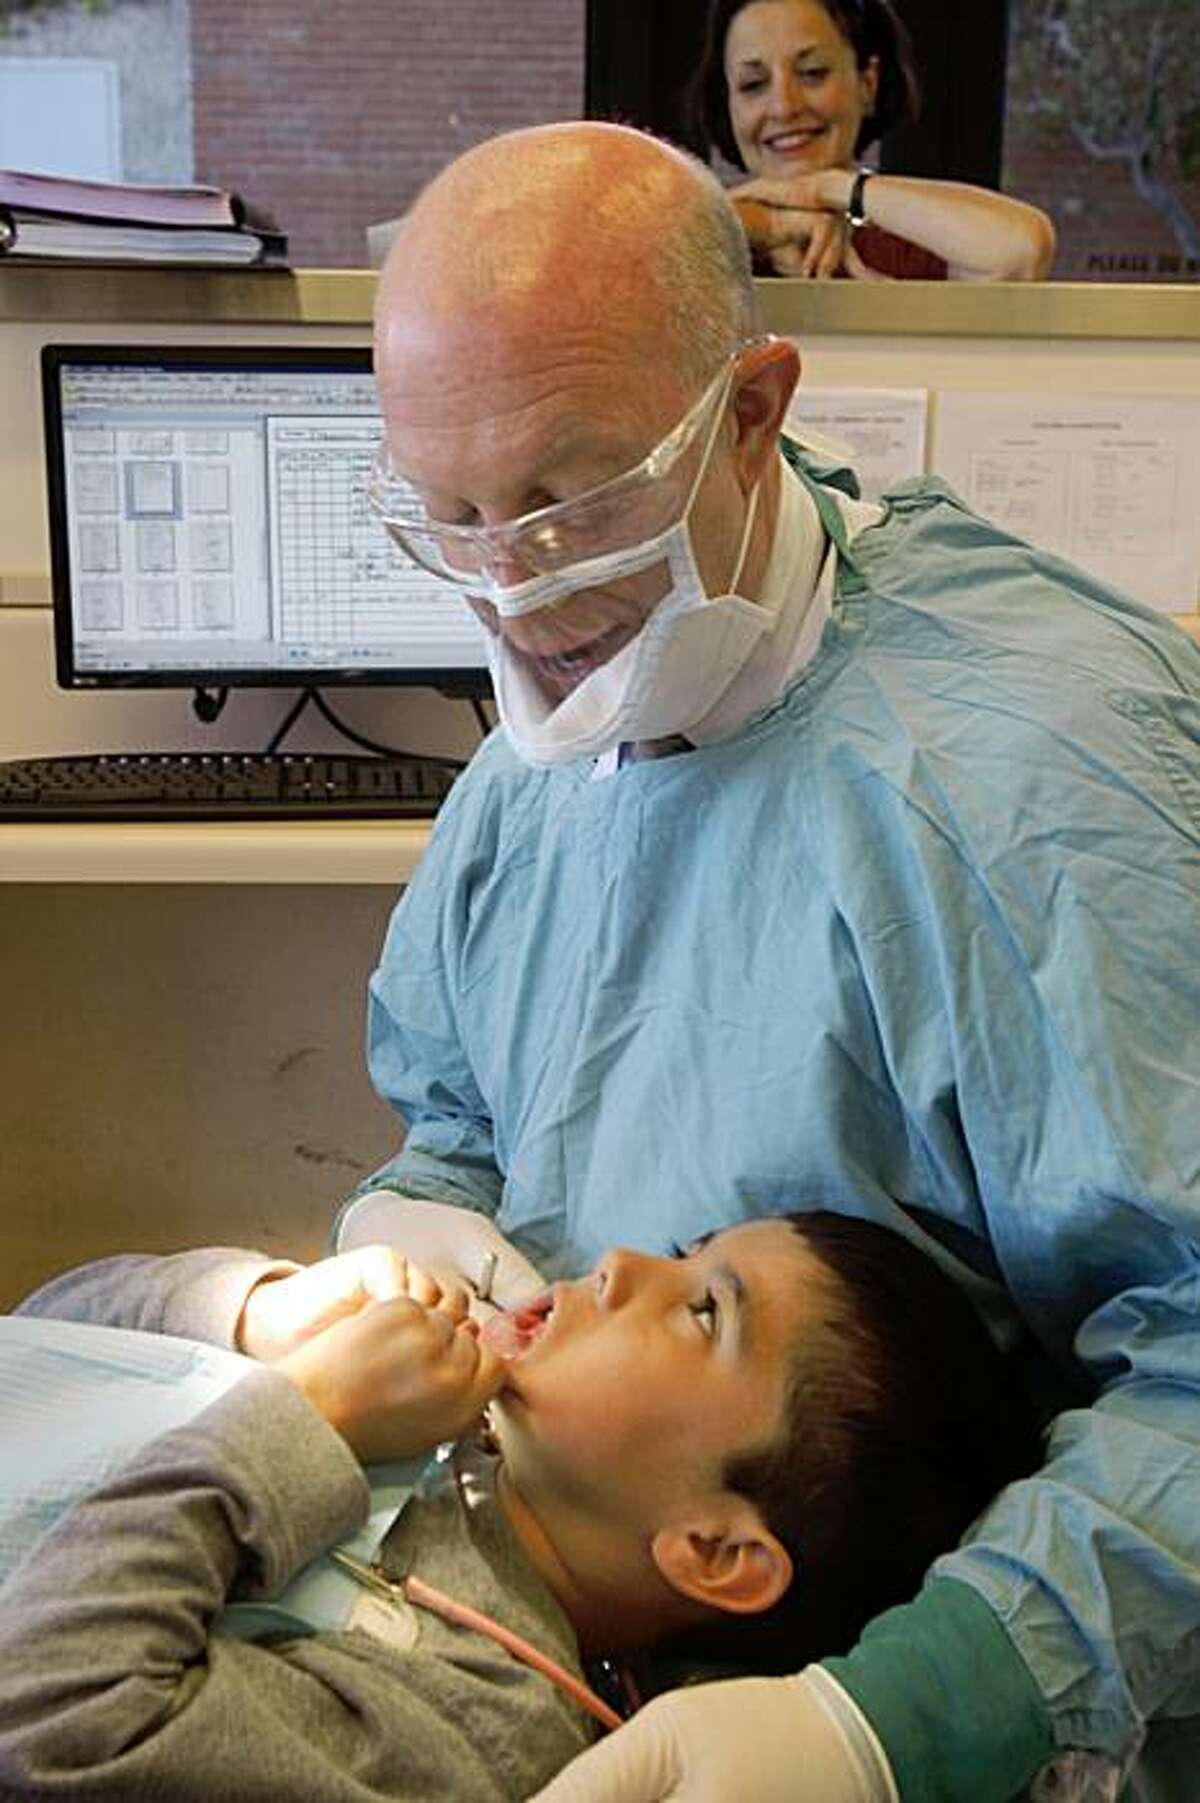 Dr. Jeff Wood (left), professor of the University of the Pacific school of dentistry chatting with Christian Macias, 7 years old, on Tuesday morning, September 8, 2009, at the UOP dental school in San Francisco, Calif. In the background is RN Jeanne Hahne who invented a new see-through surgical mask and is testing the product at this dental office.